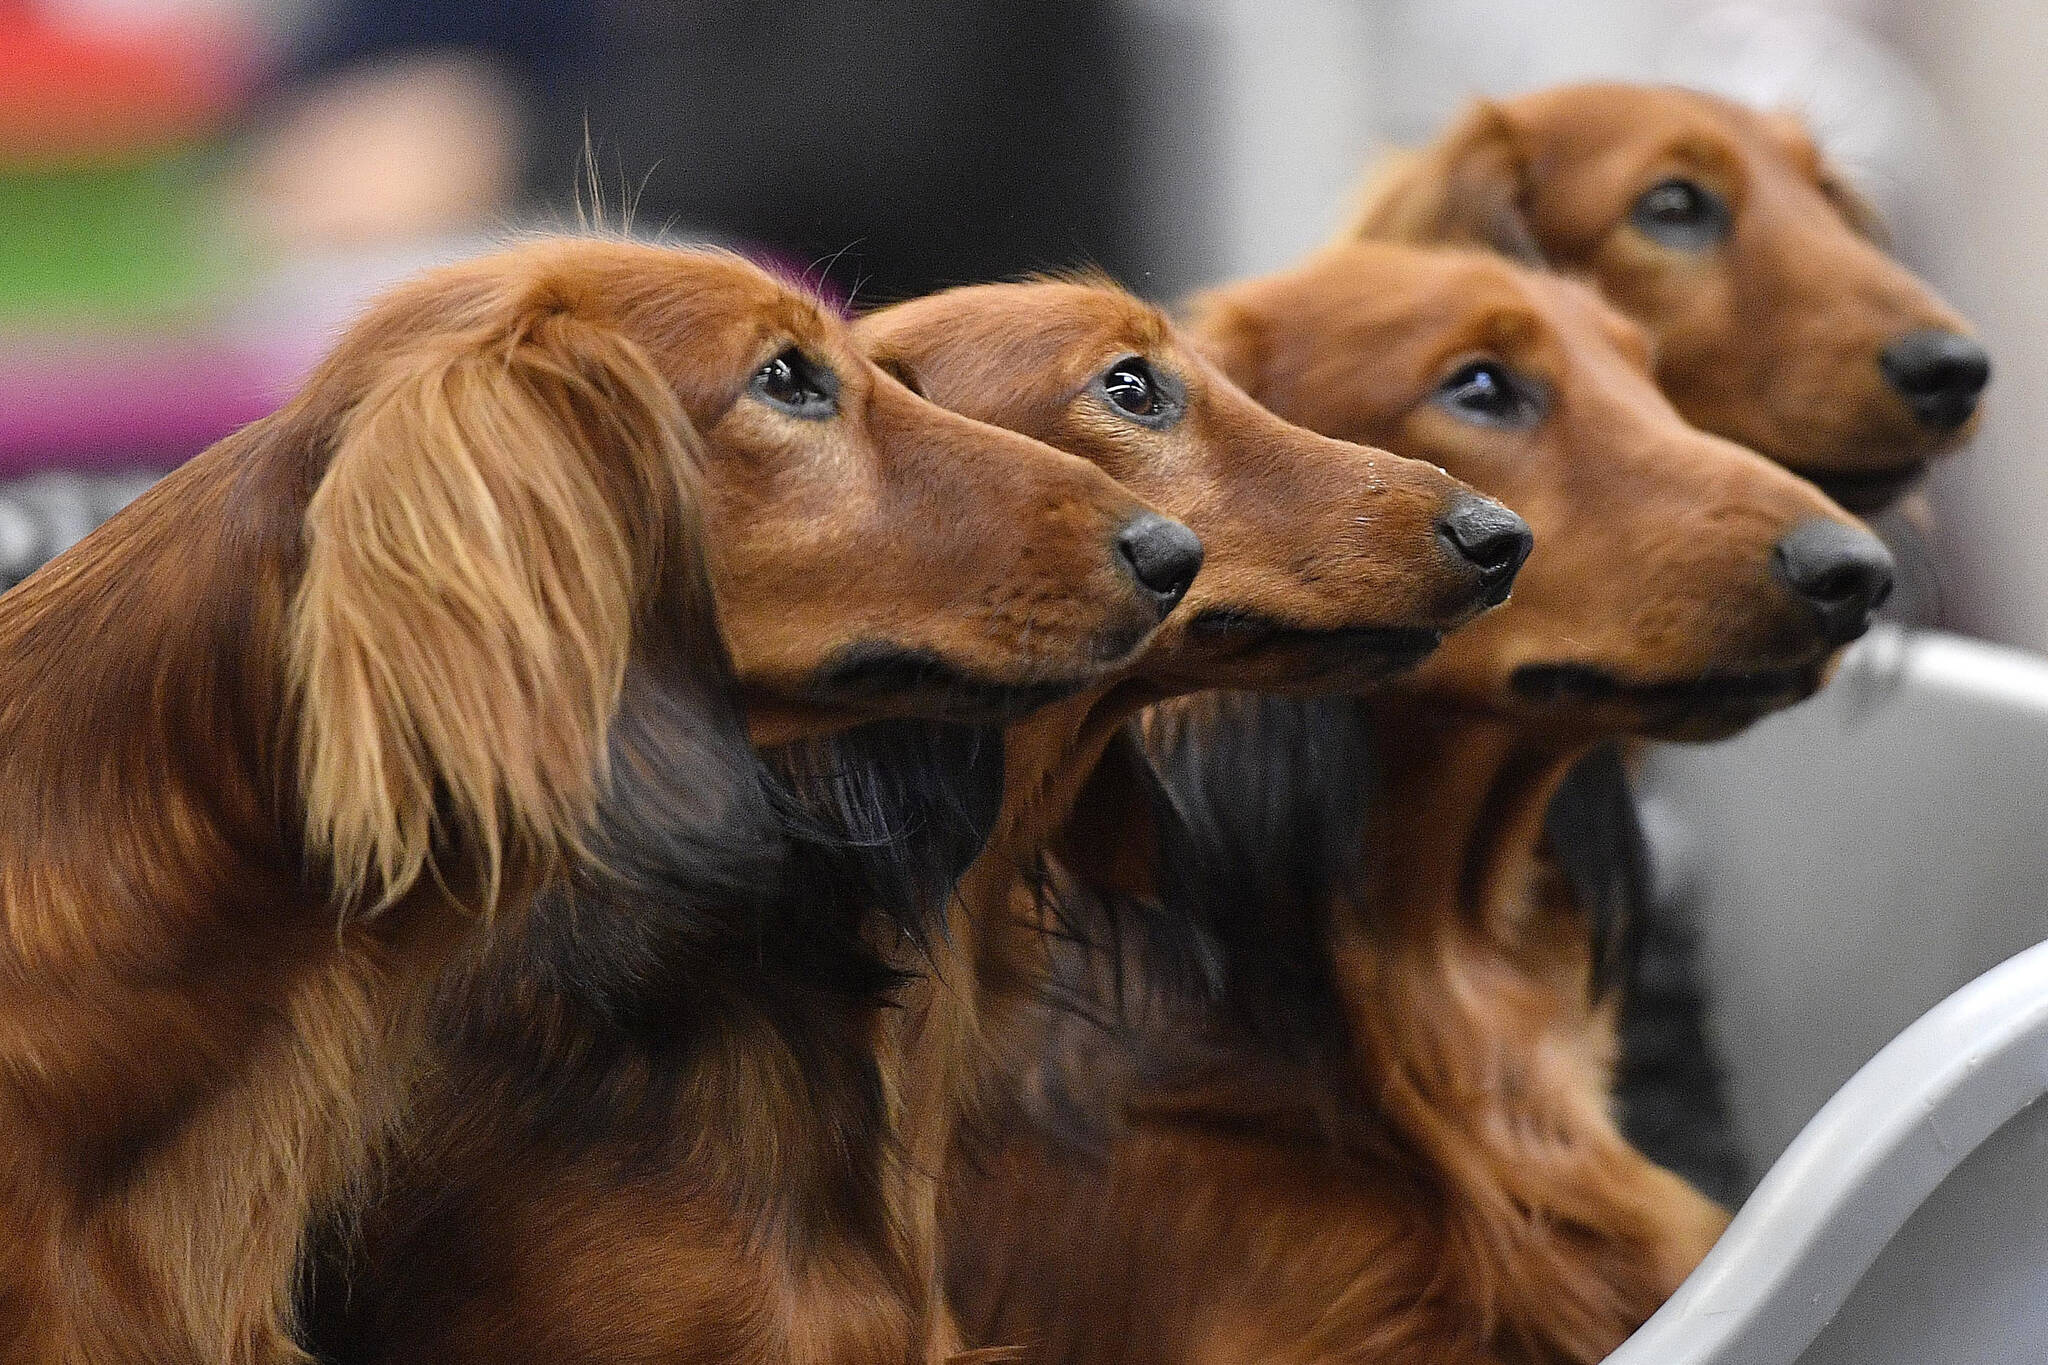 Dachshund dogs wait in a box before competition at a dog show in Dortmund, Germany, on Friday, Oct. 13, 2017. Research released on Thursday, April 28, 2022, confirms what dog lovers know _ every pup is truly an individual. A new study has found that many of the popular stereotypes about the behavior of specific breeds aren’t supported by science. (AP Photo / Martin Meissner)